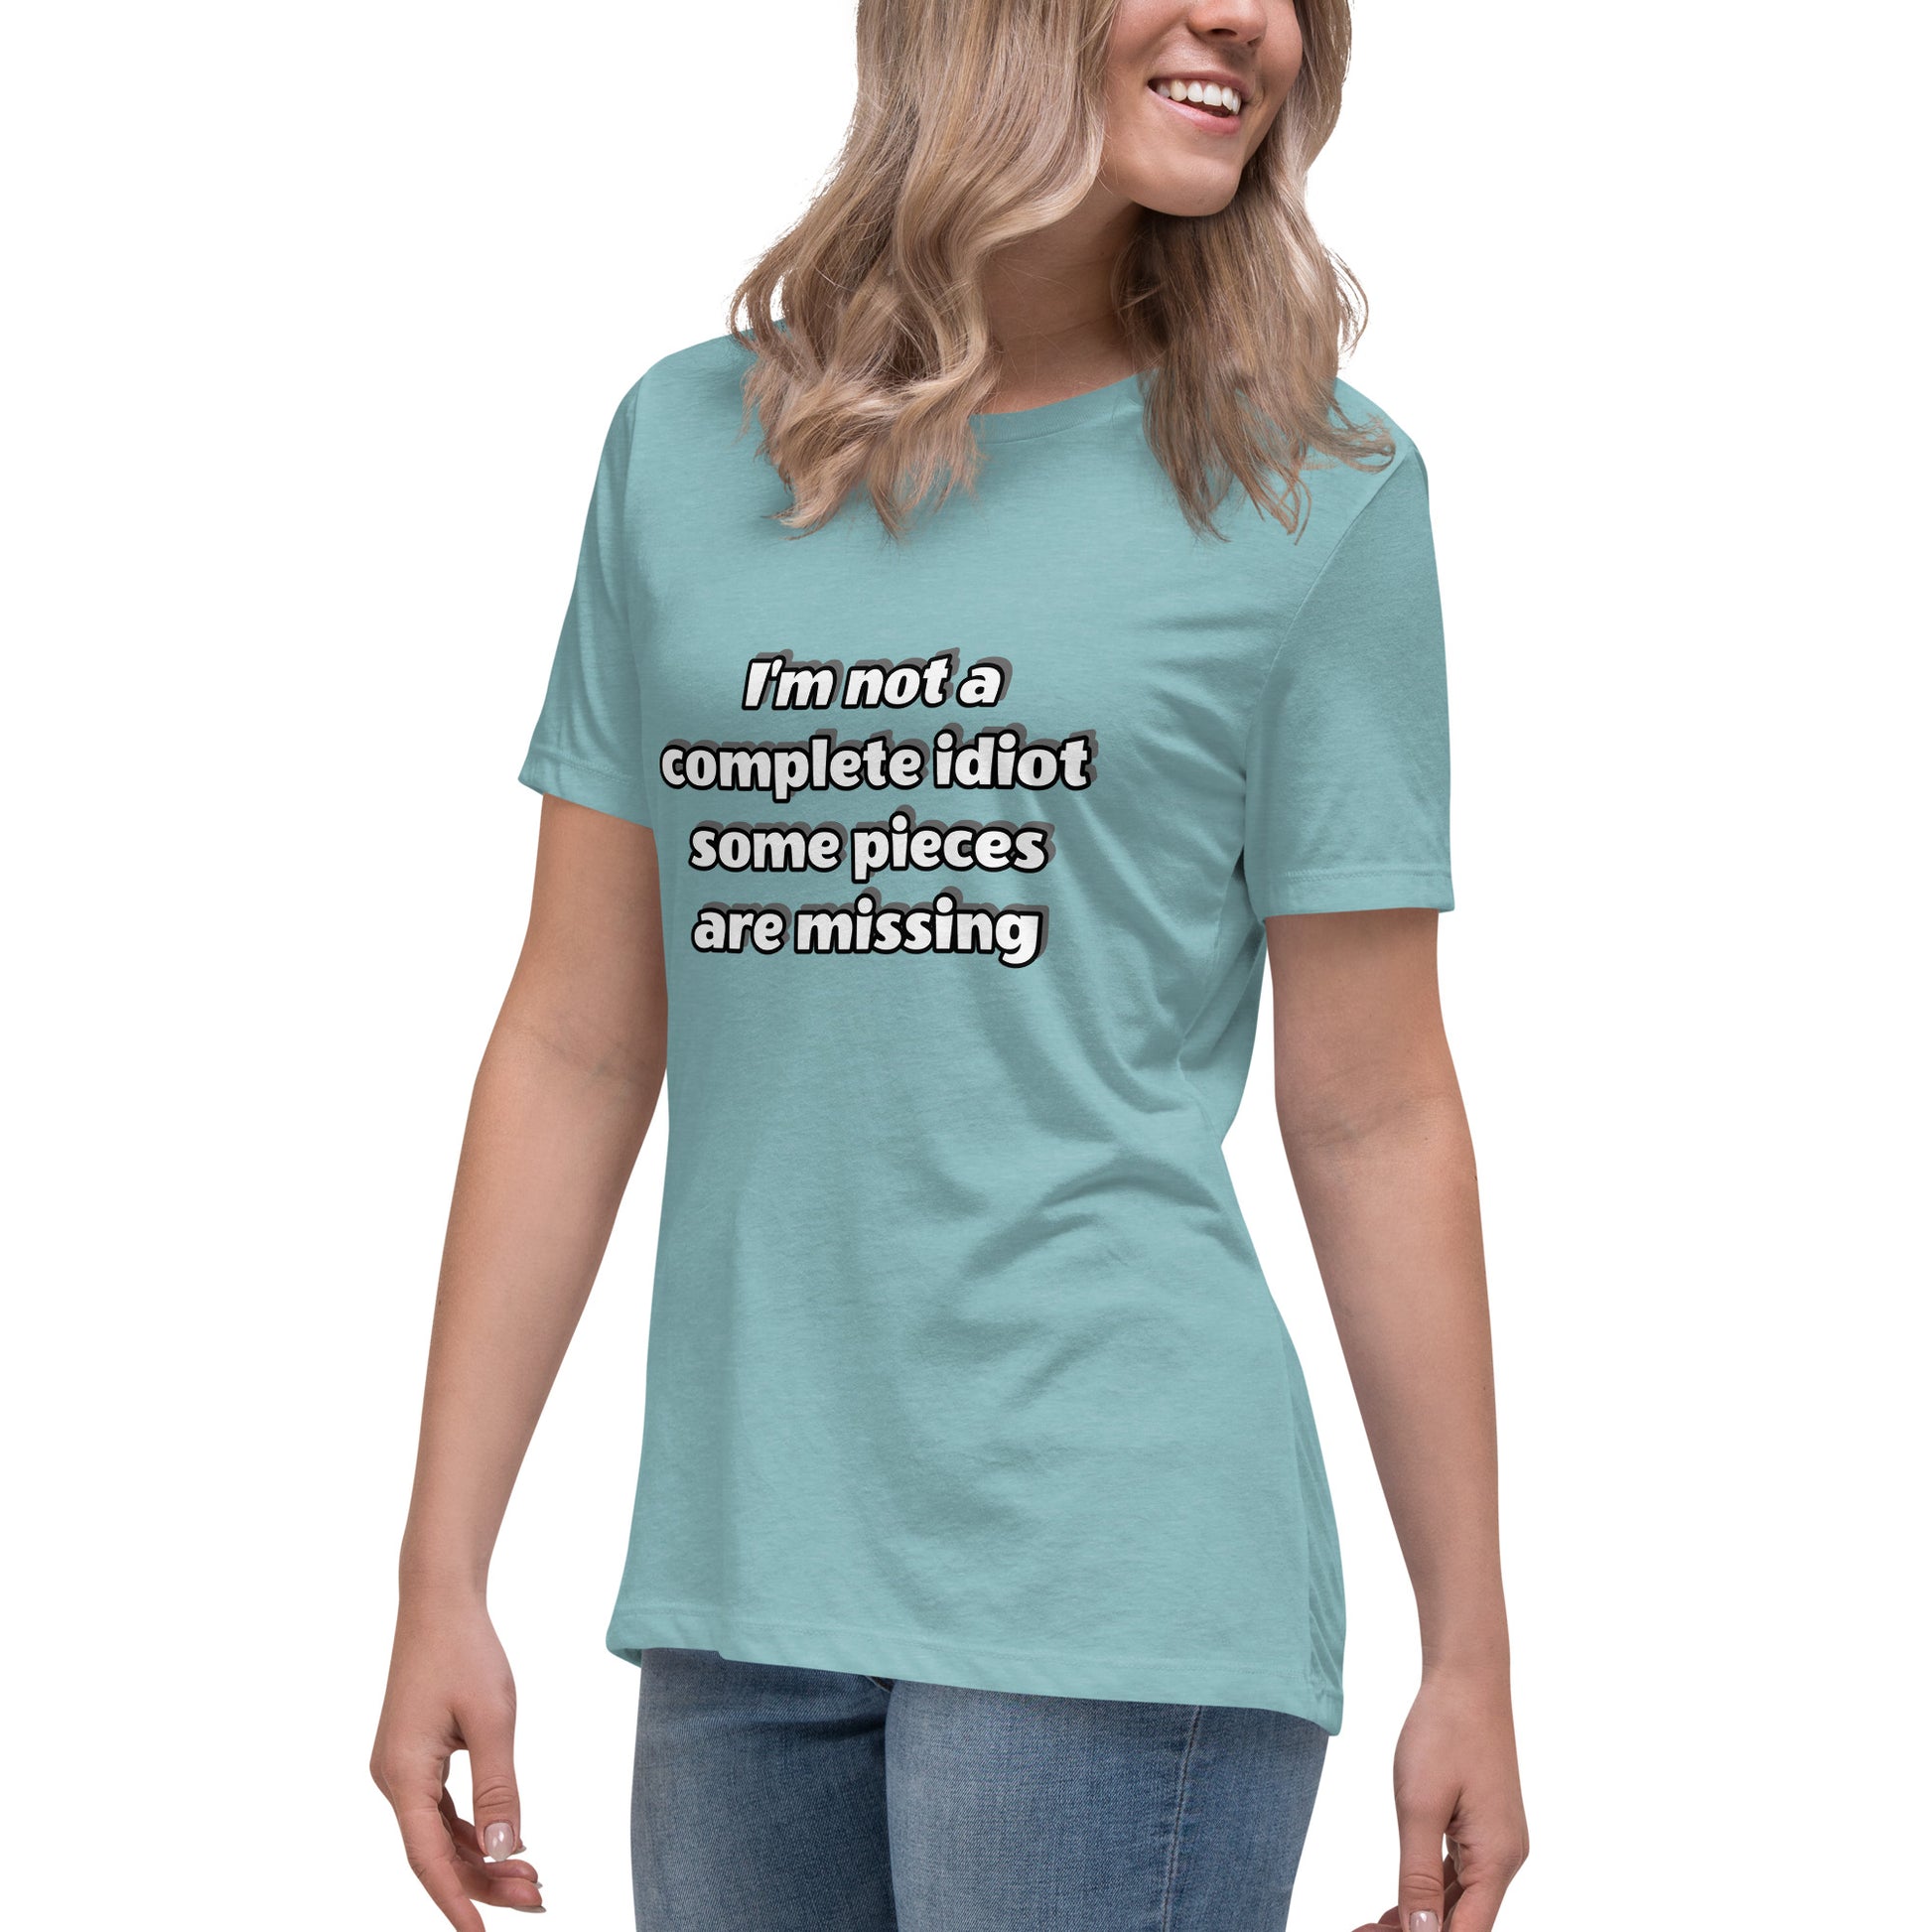 Women with blue lagoon t-shirt with text “I’m not a complete idiot, some pieces are missing”